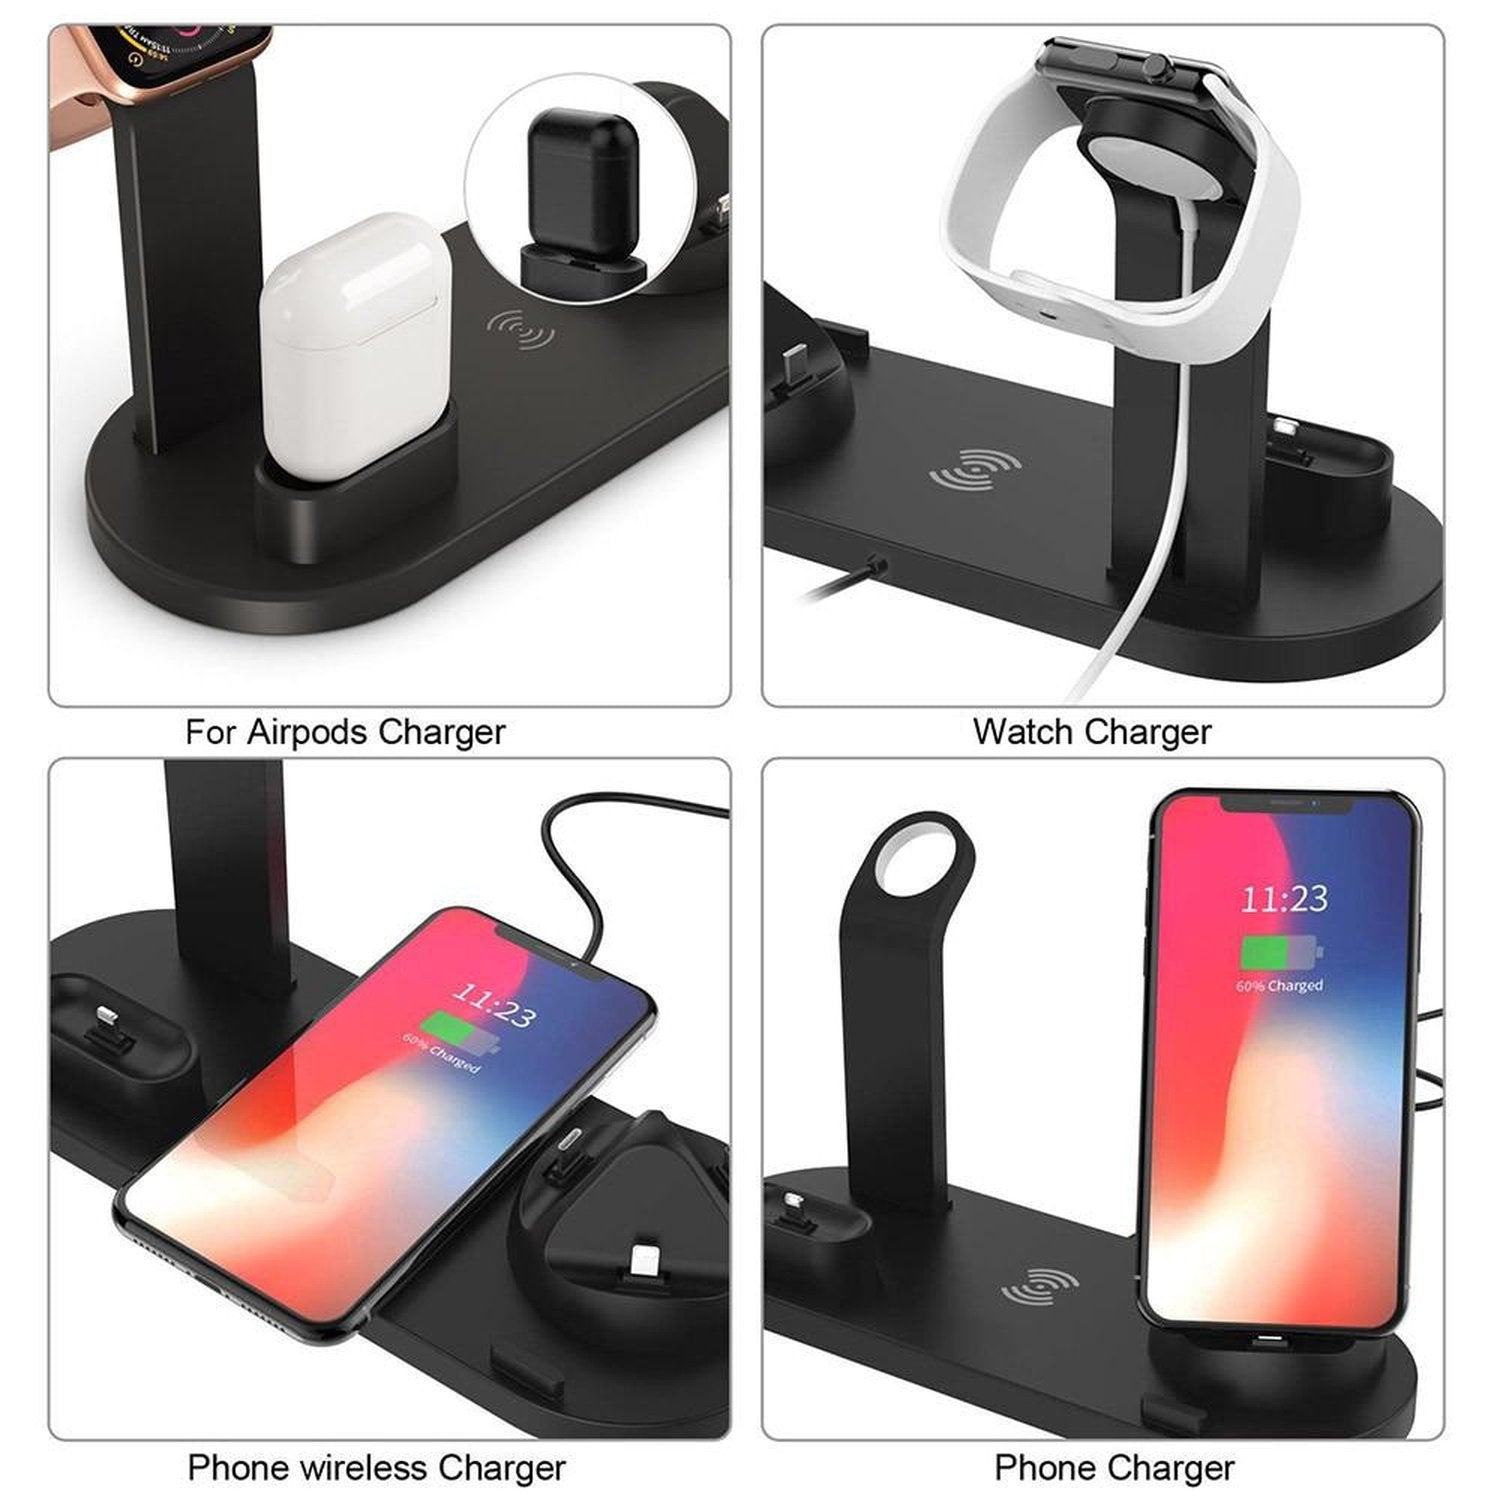 4-in-1 Multi Device Charging Dock Station Pad Apple iPhone Watch Google Pixel Qi Wireless Samsung